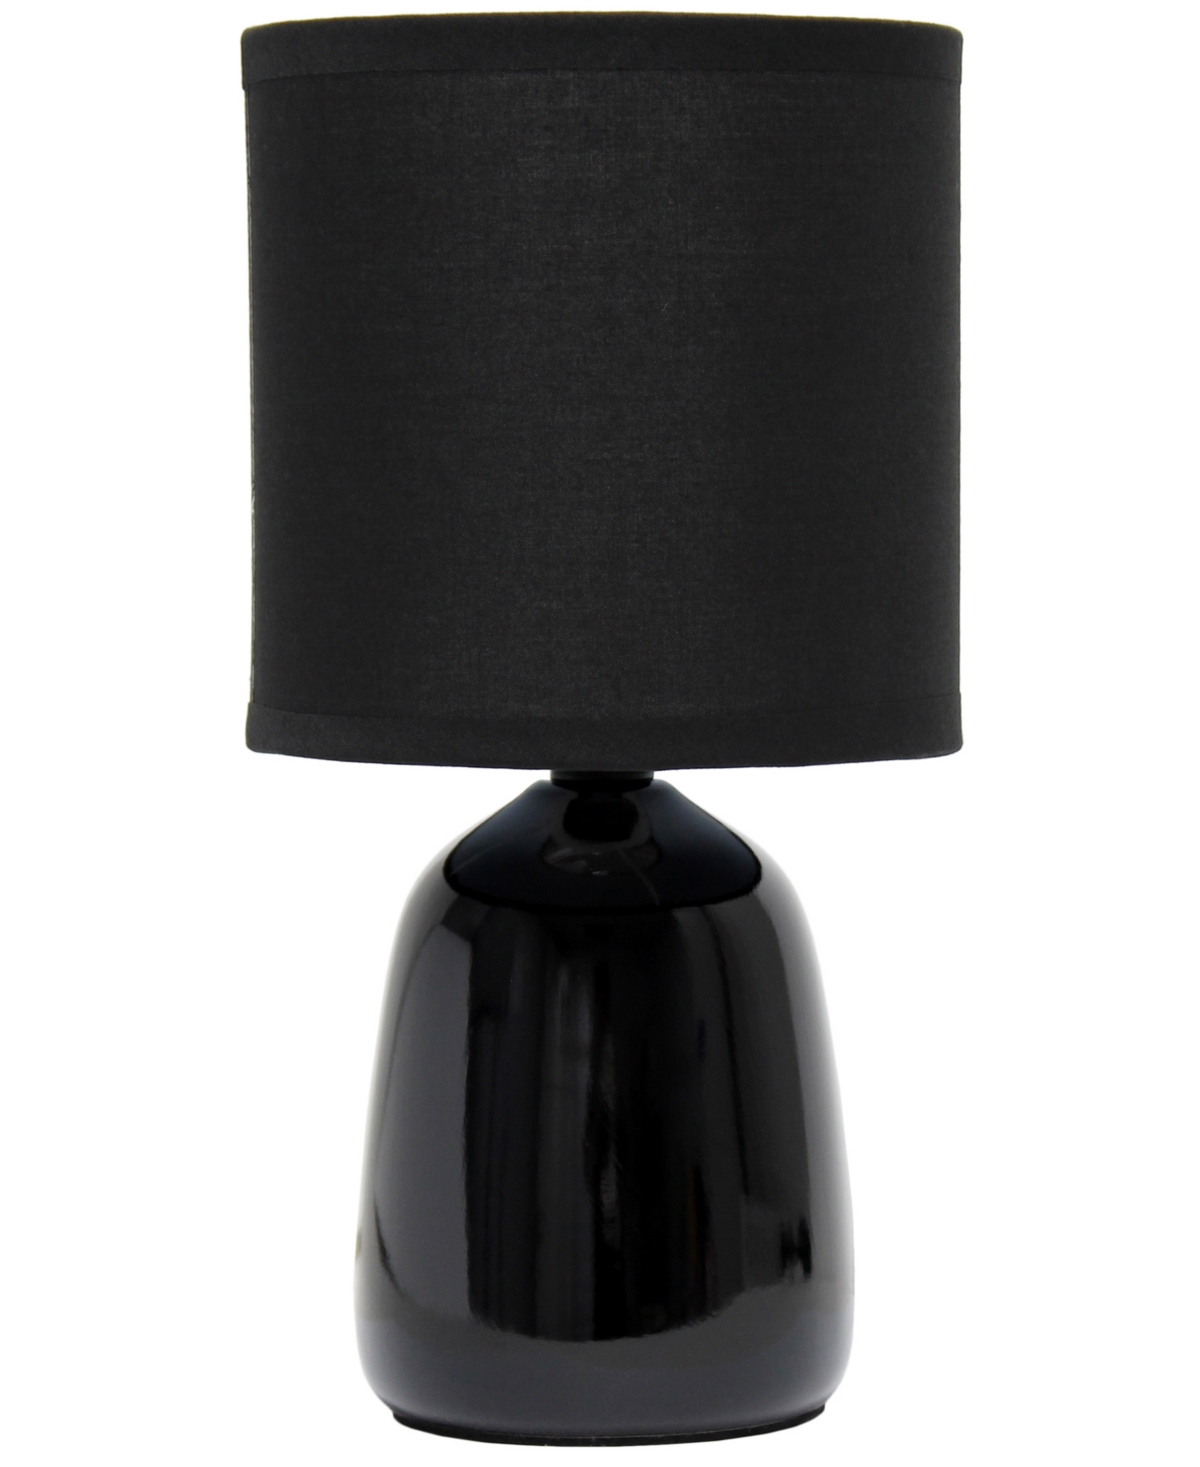 Shop Simple Designs 10.04" Tall Traditional Ceramic Thimble Base Bedside Table Desk Lamp With Matching Fabric Shade In Navy Blue